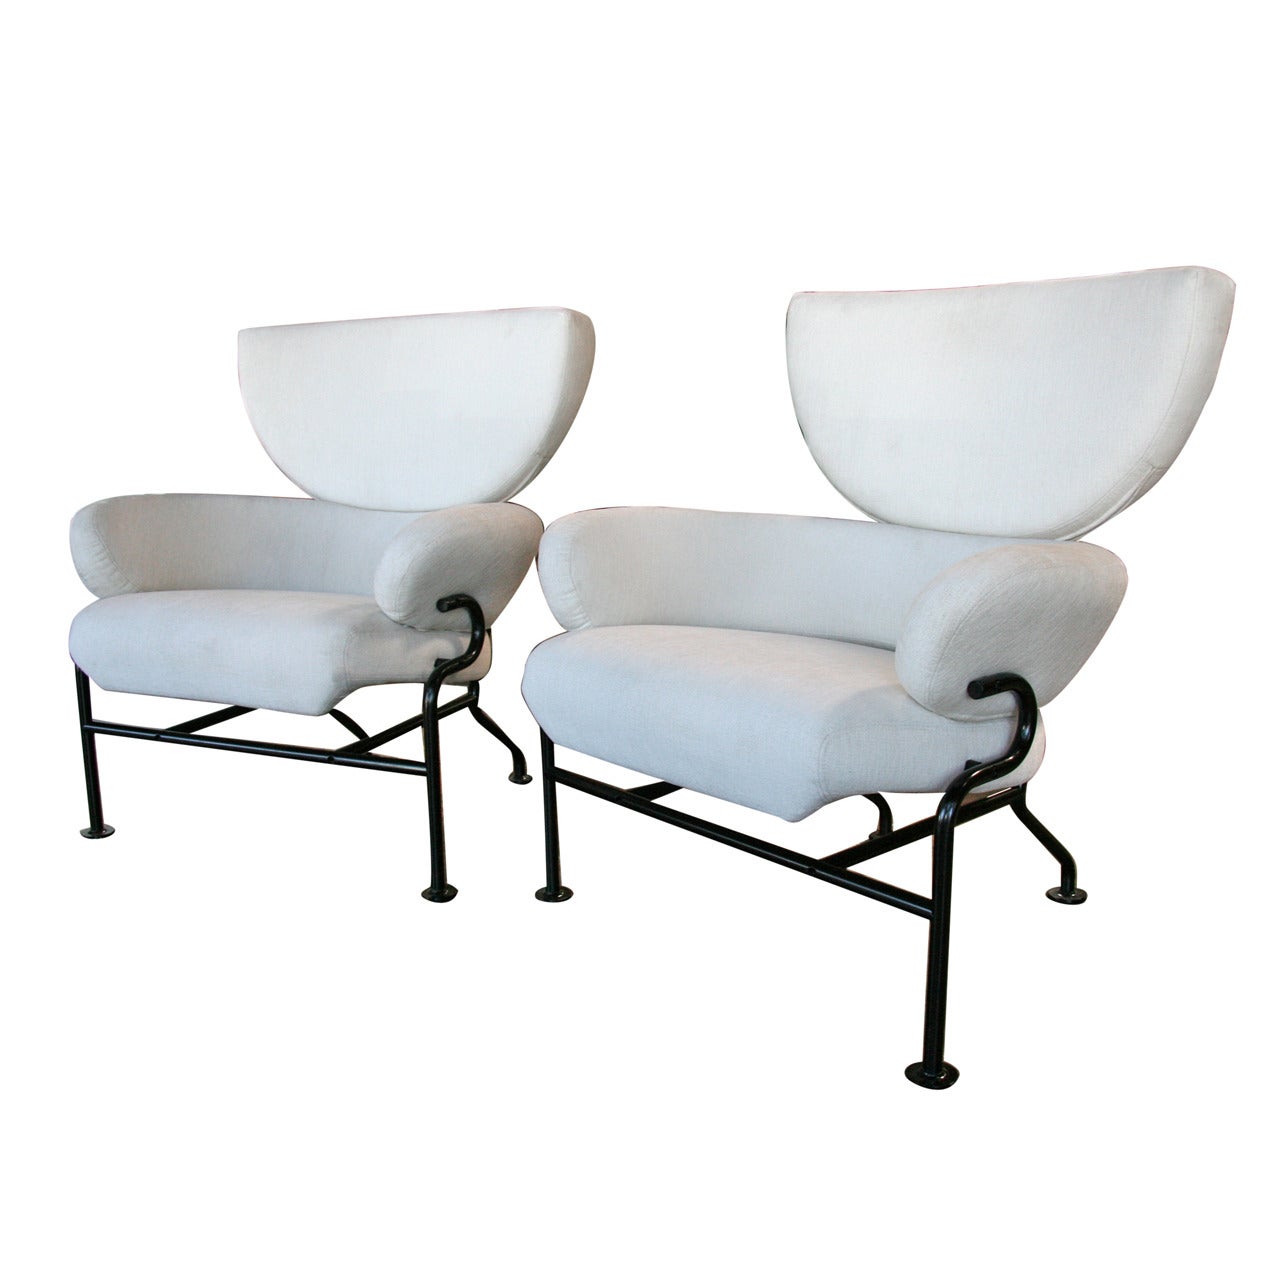 Armchairs “Tre pezzi PL19” by Franco Albini and Franca Helg